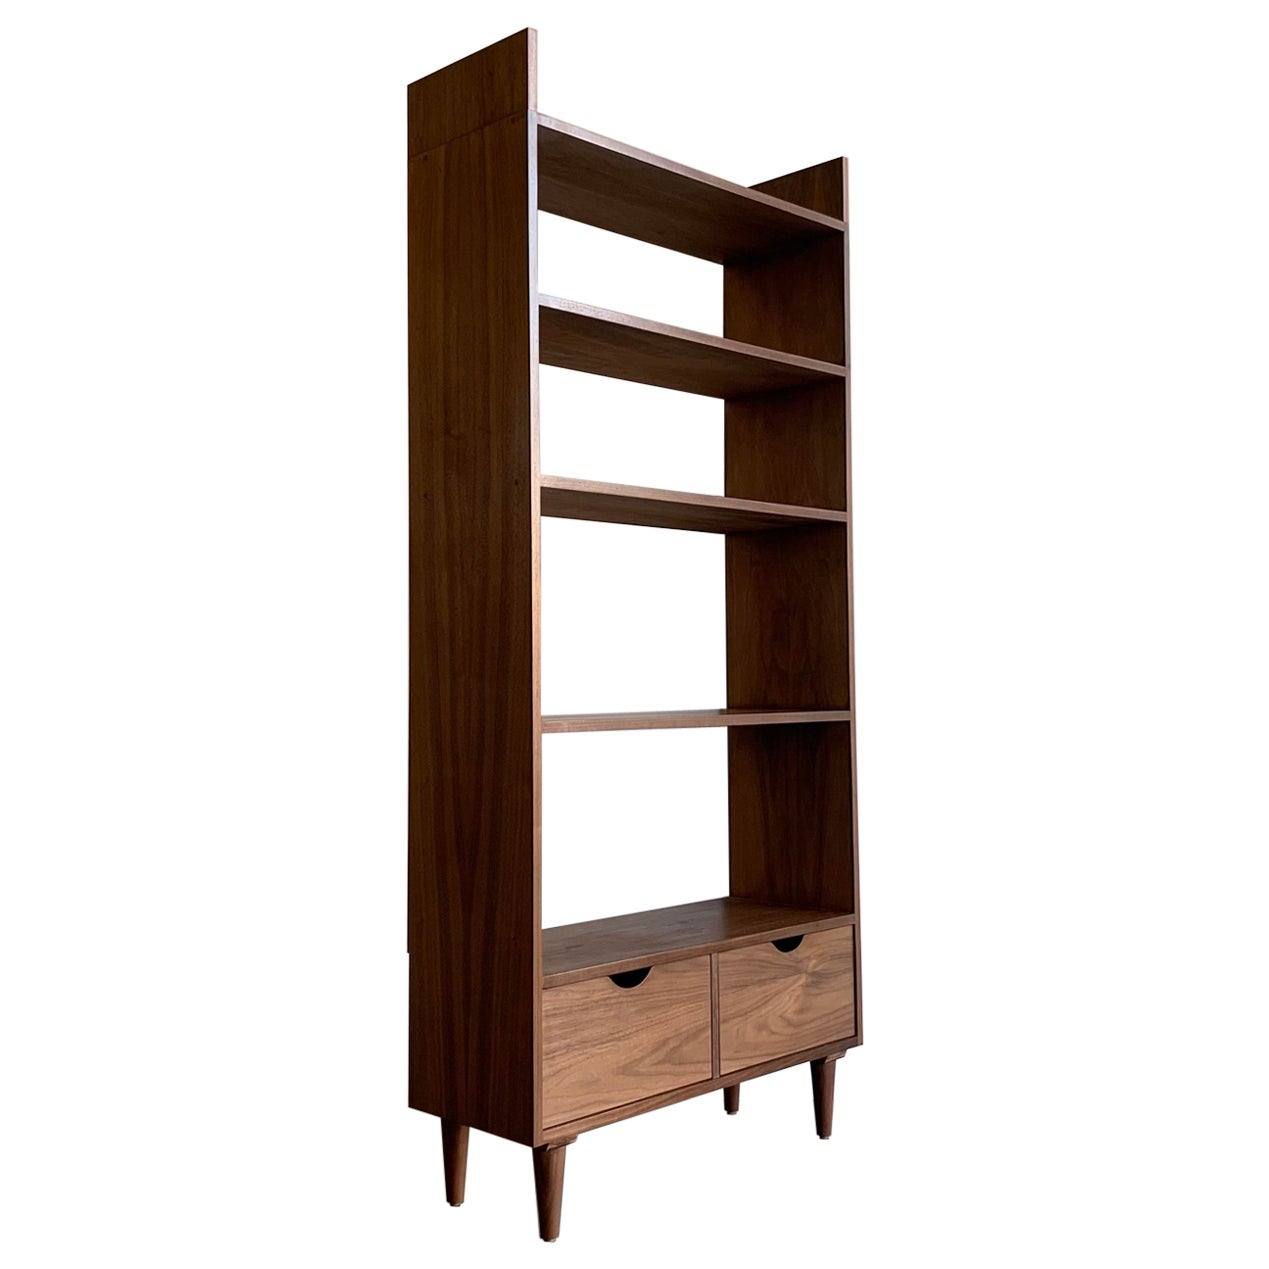 1960s Mid-Century Modern Style Walnut Bookcase For Sale